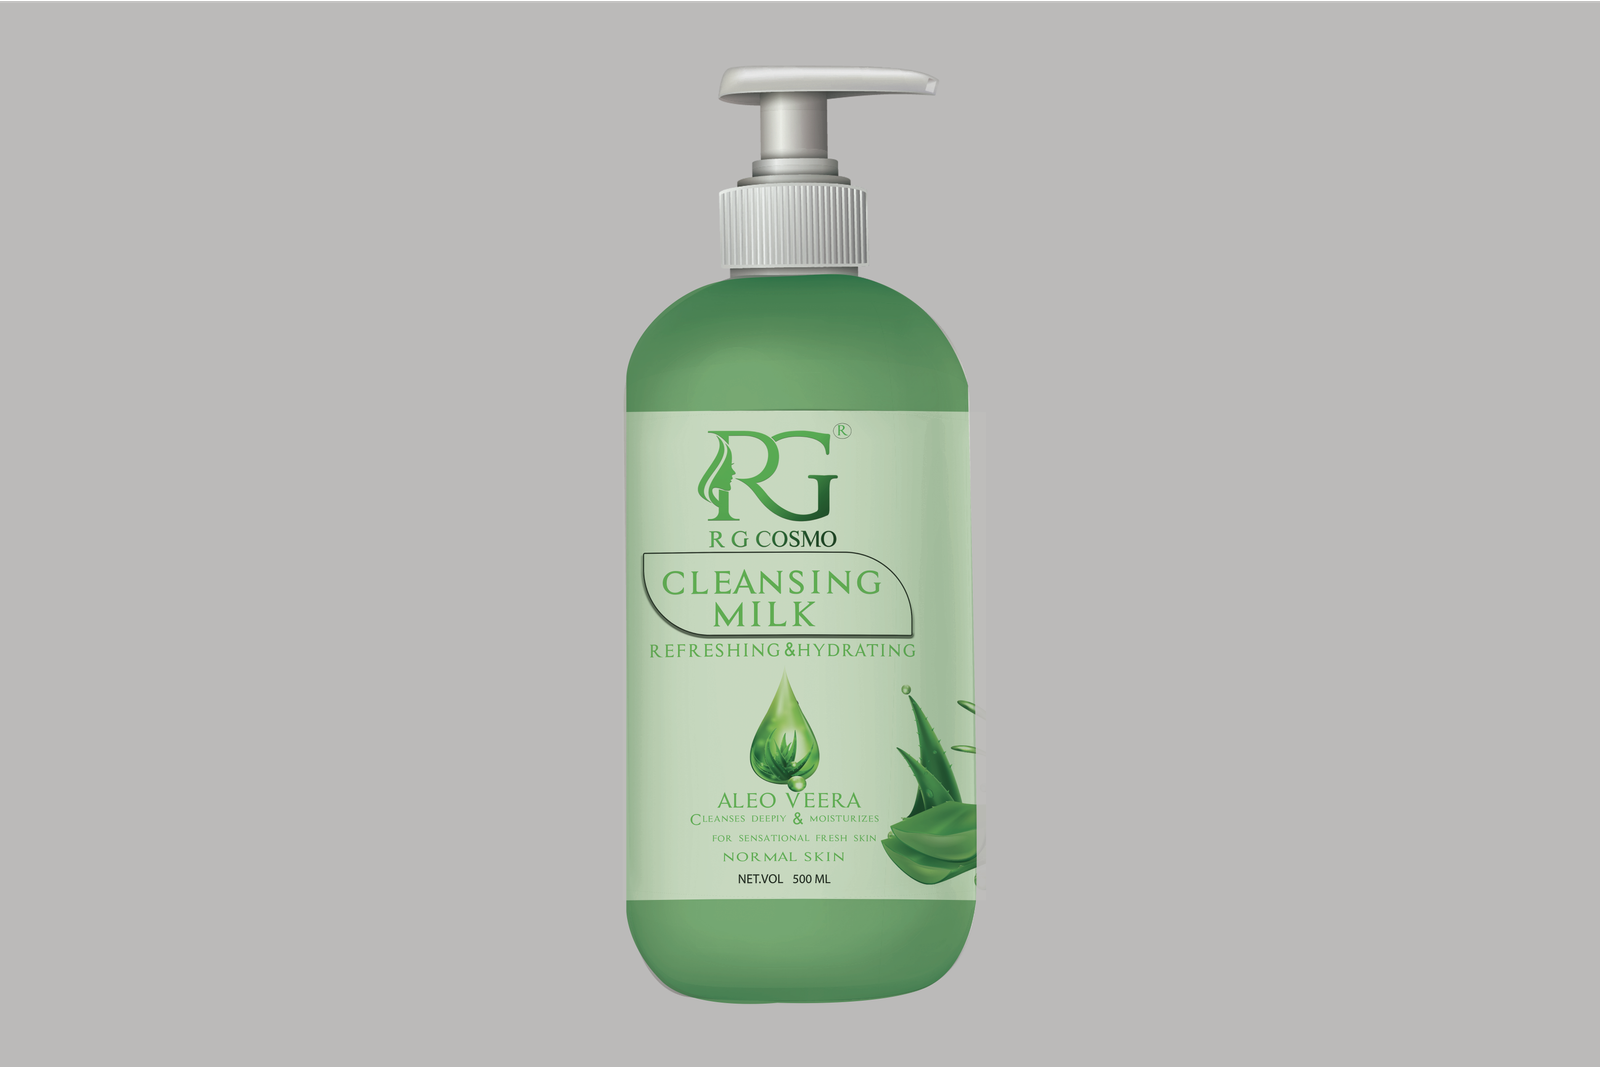 RG COSMO CLEASING MILK help to remove the dirt, oil and urban pollutants that water alone can leave behind Removes Impurities. Prevents Pimples and Acne. Relieves Dry Skin. Helps Cure Itchiness and Irritation. Improves Skin Health . Anti-bacterial. Moisturizer